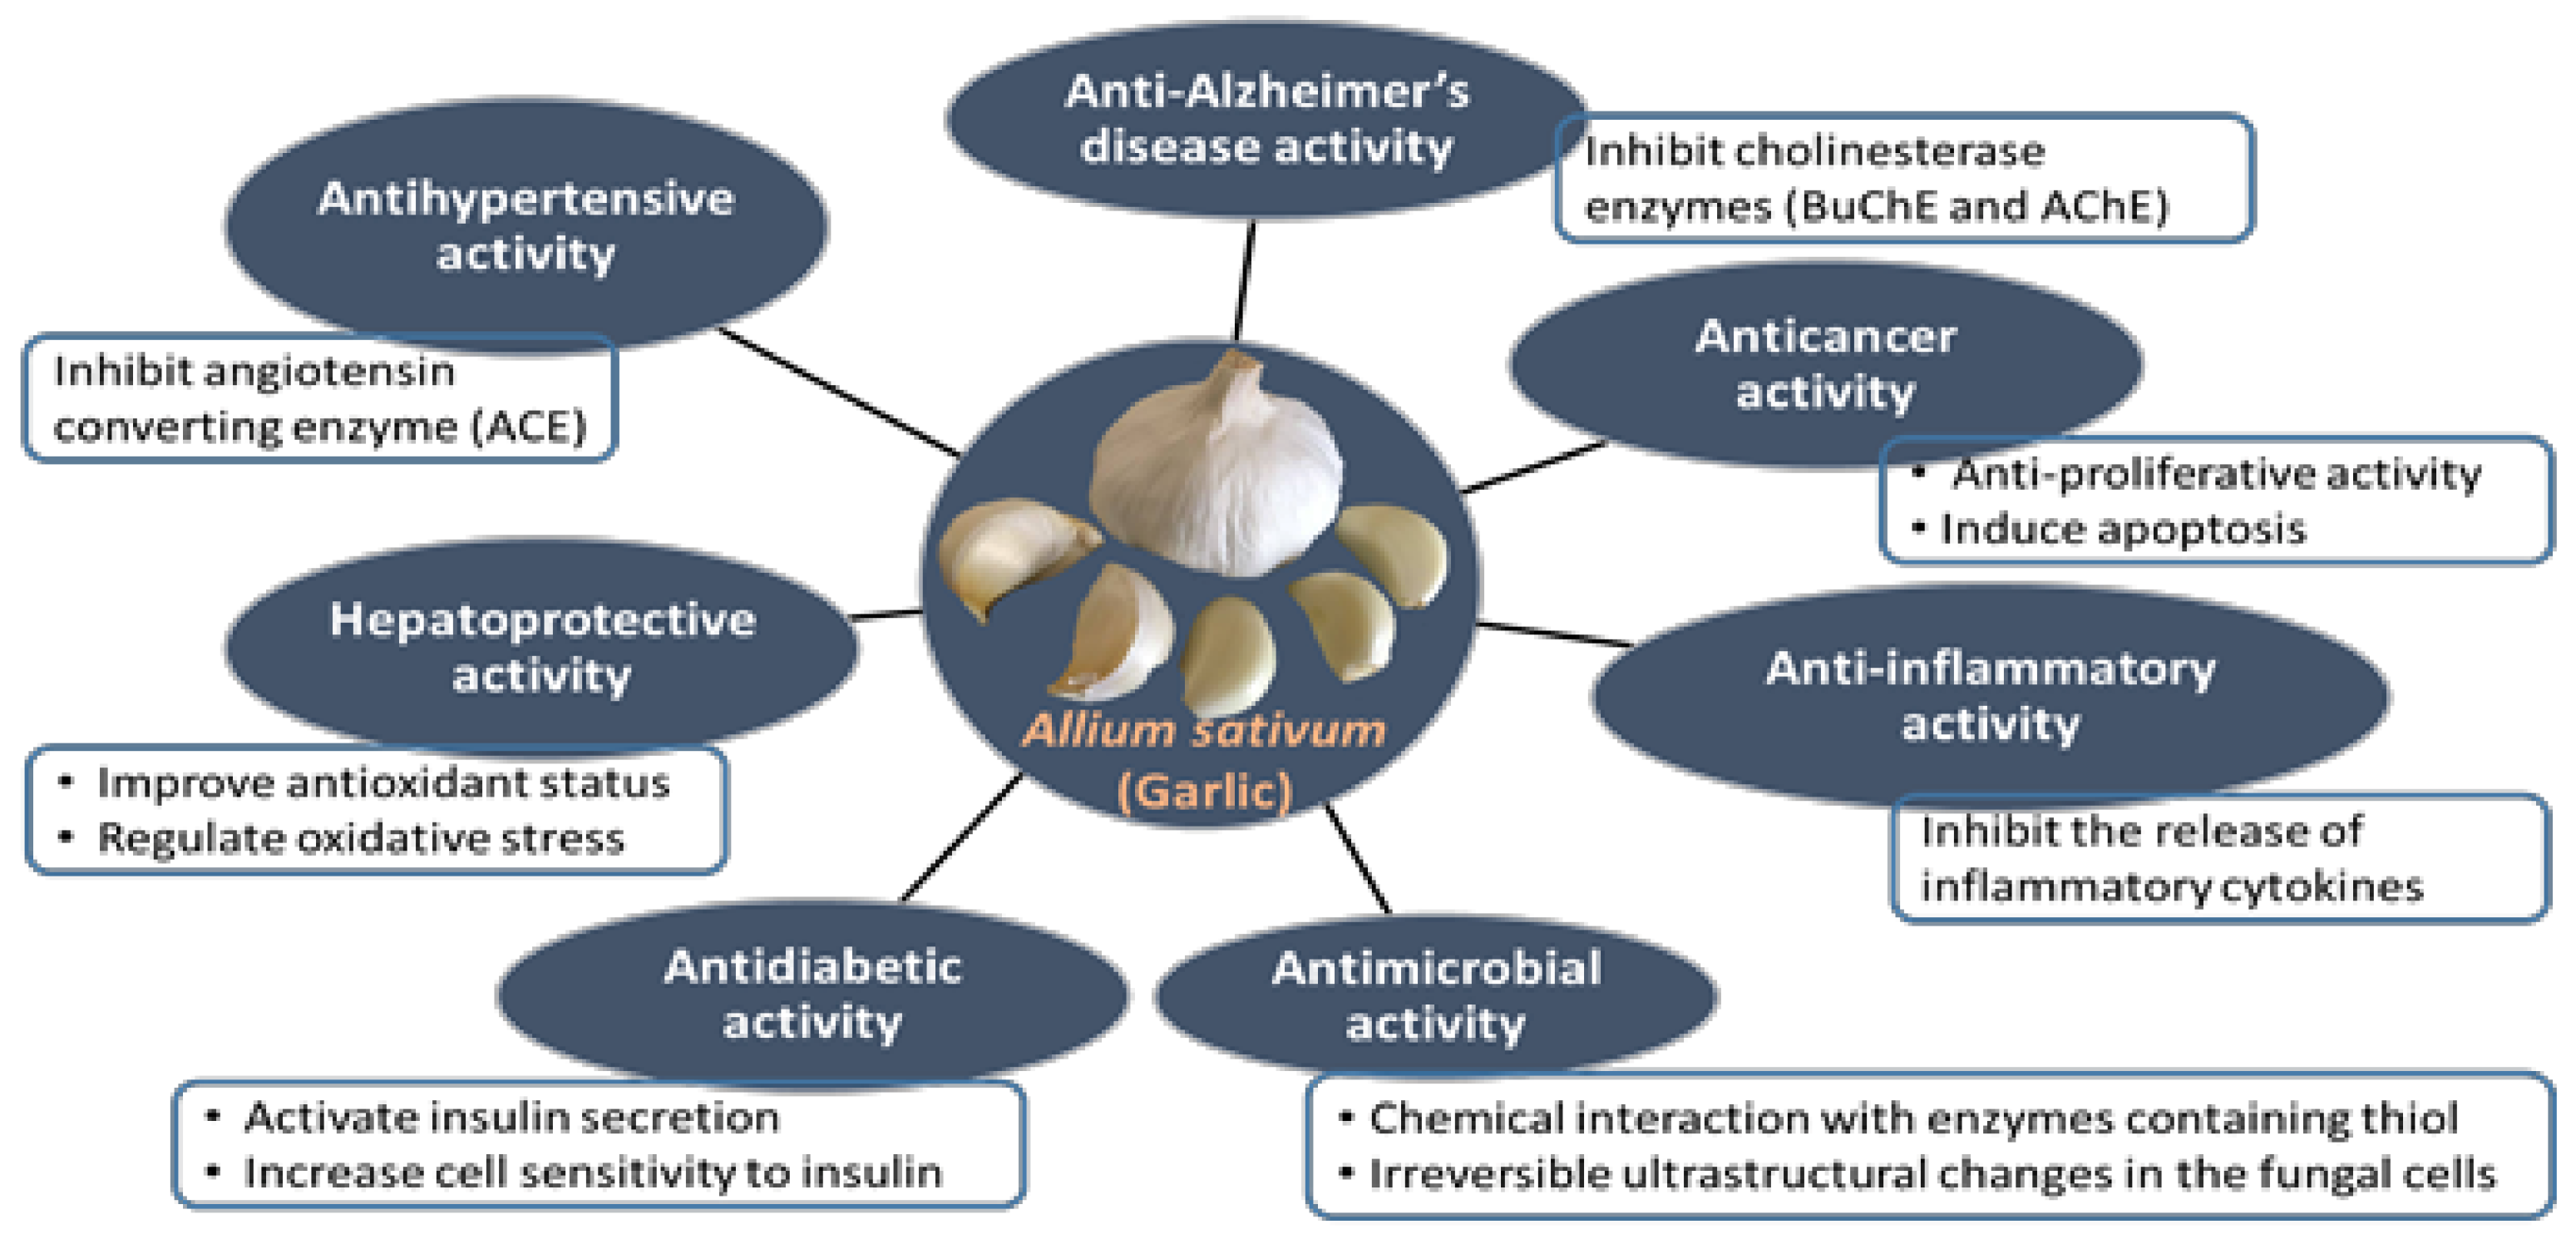 Anthelmintic activity of plant extracts, Anthelmintic activity of garlic